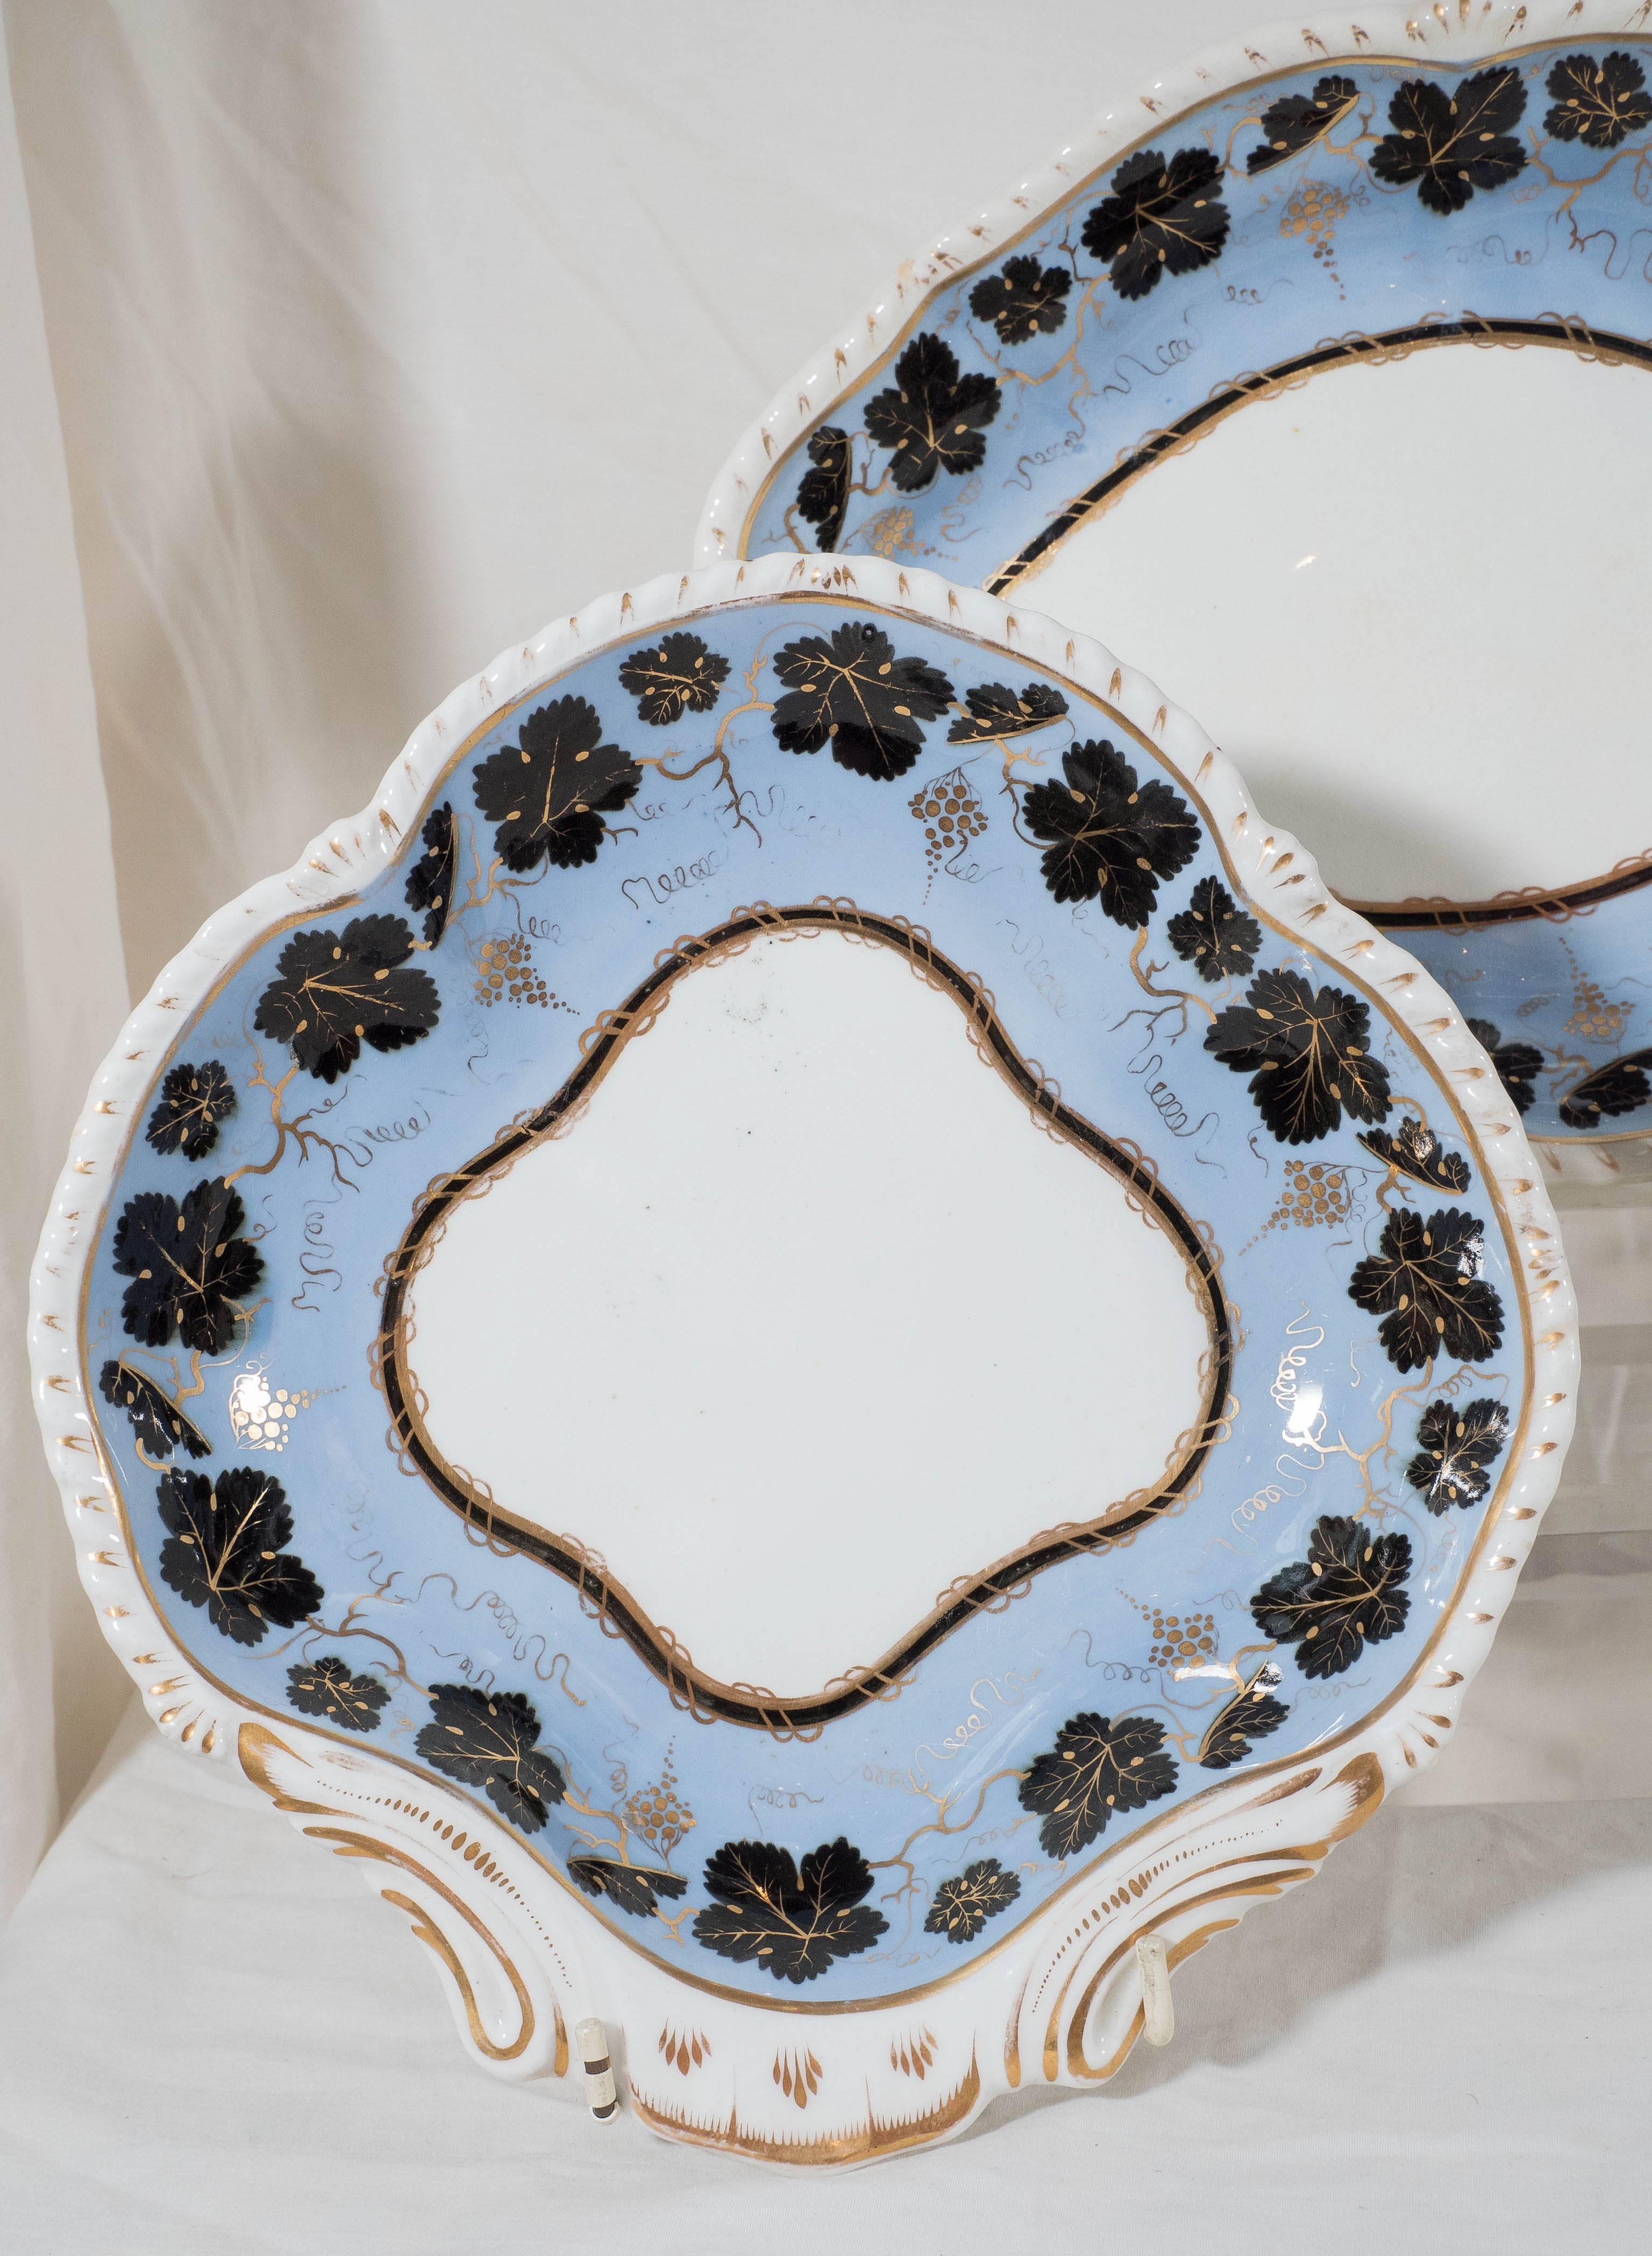 19th Century Antique Porcelain Light Blue Dishes Painted with Black Leaves (13 pieces NOT 15)